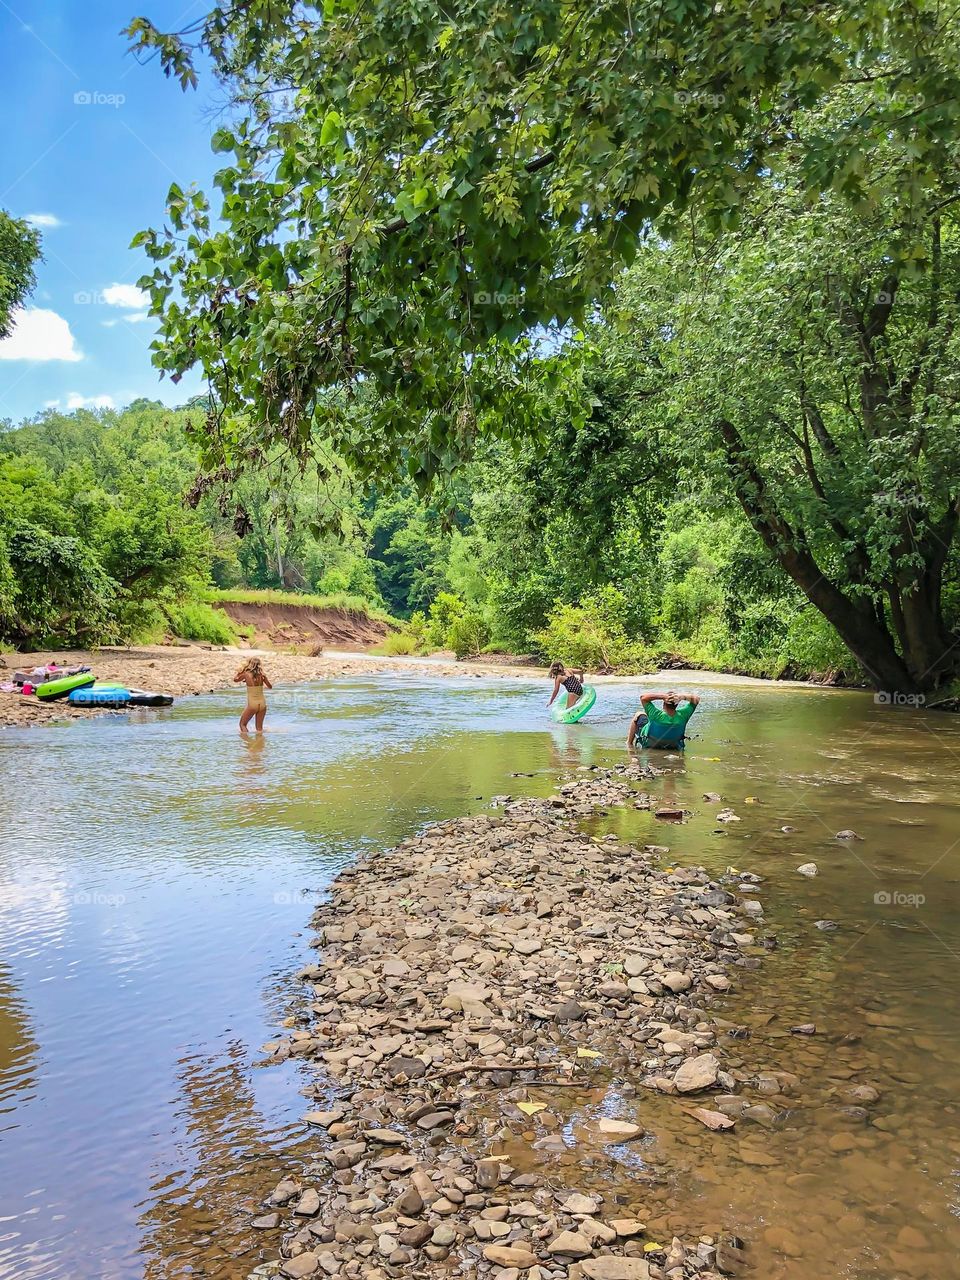 Day at the creek